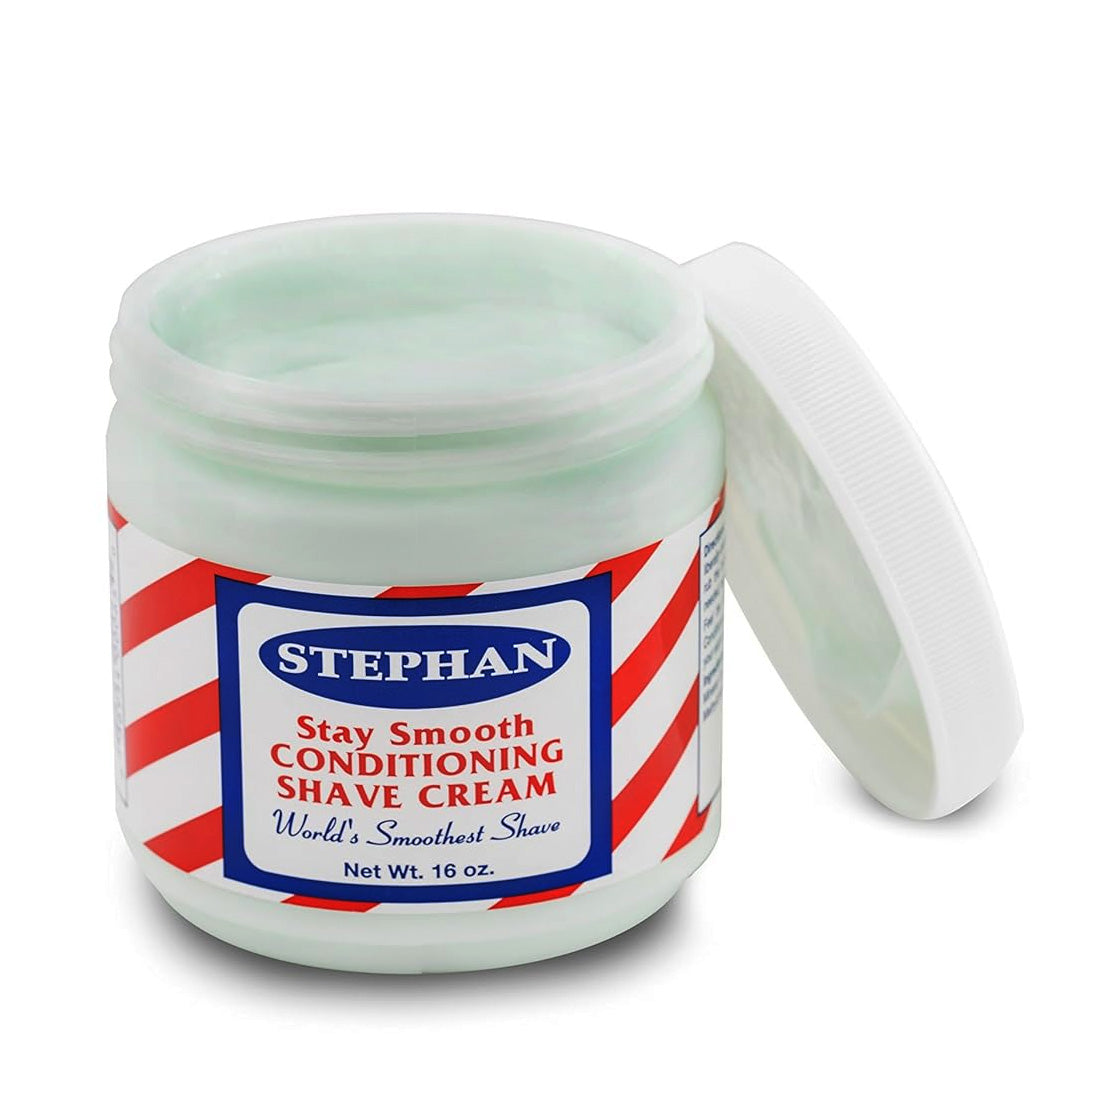 Stephan Stay Smooth Shave Cream